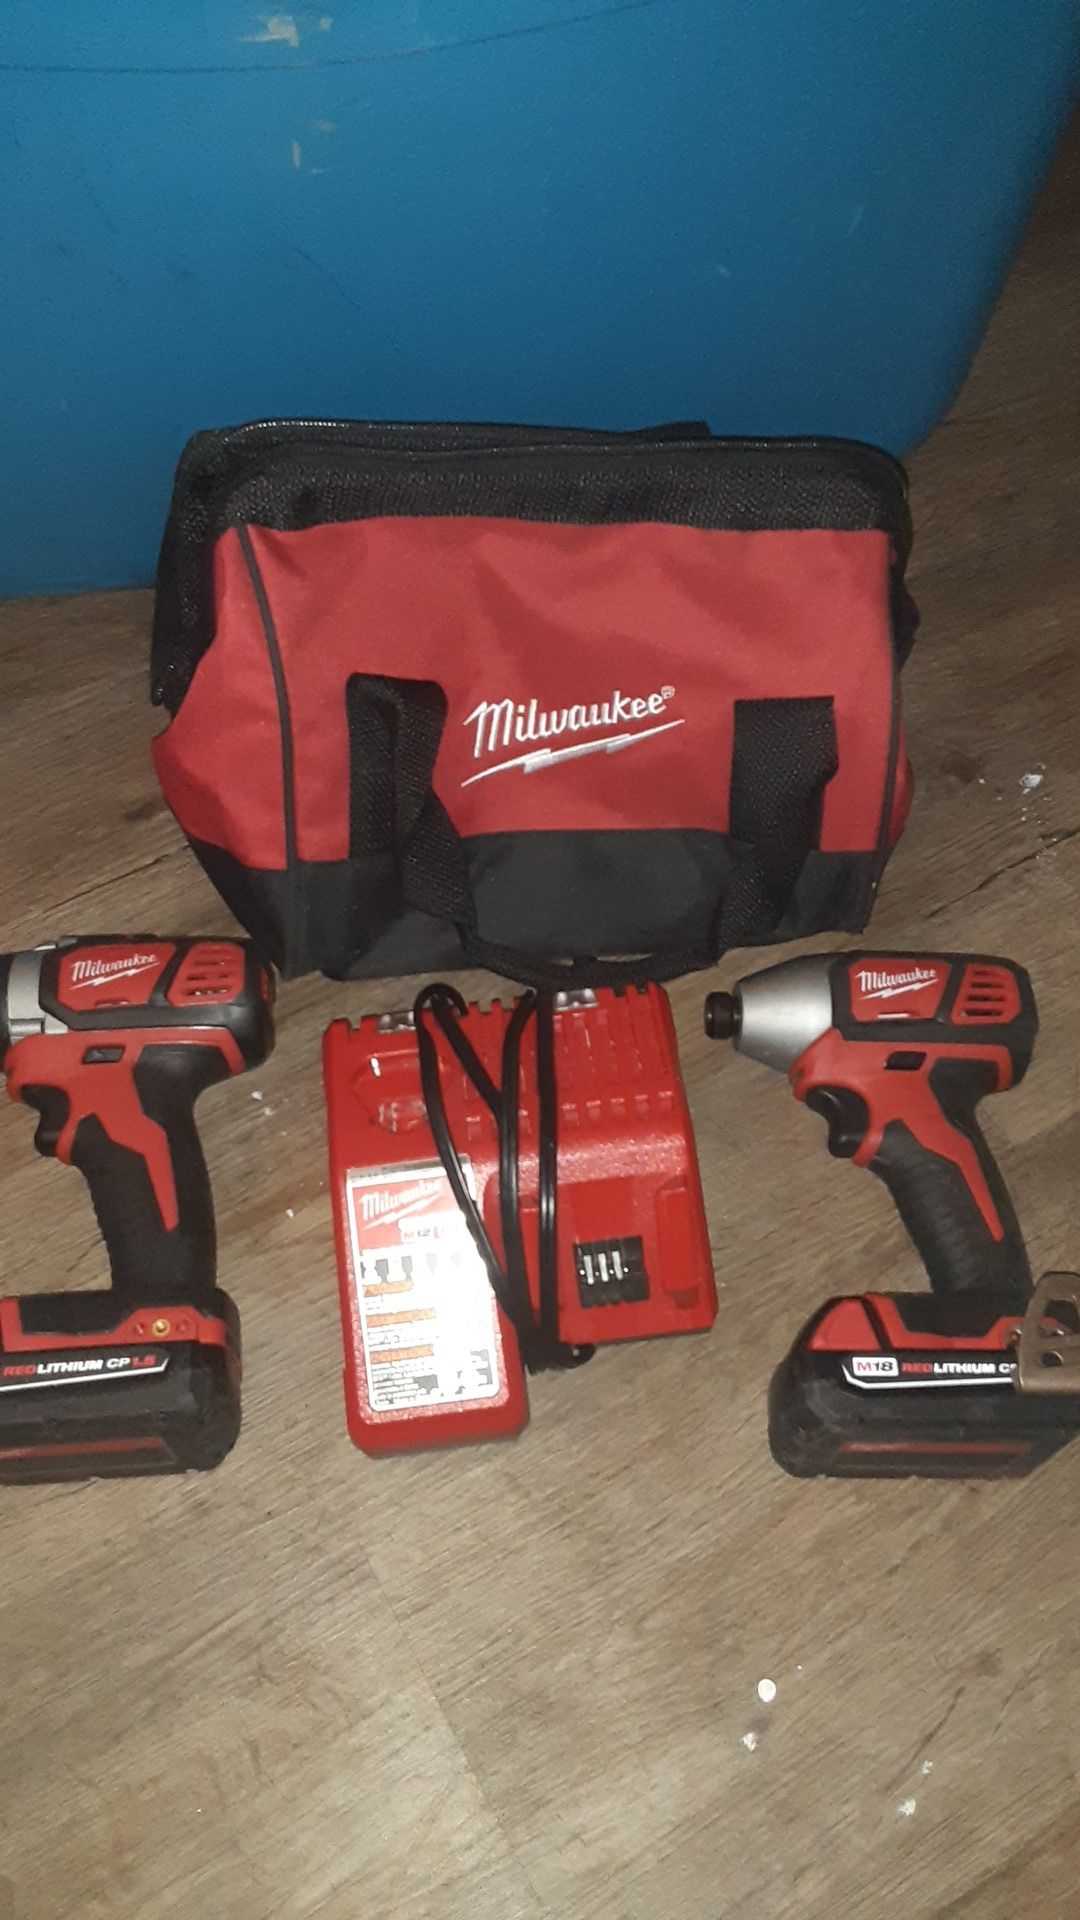 Milwaukee m18 lithium 1/2" drill driver and 1/4" hex impact driver combo kit